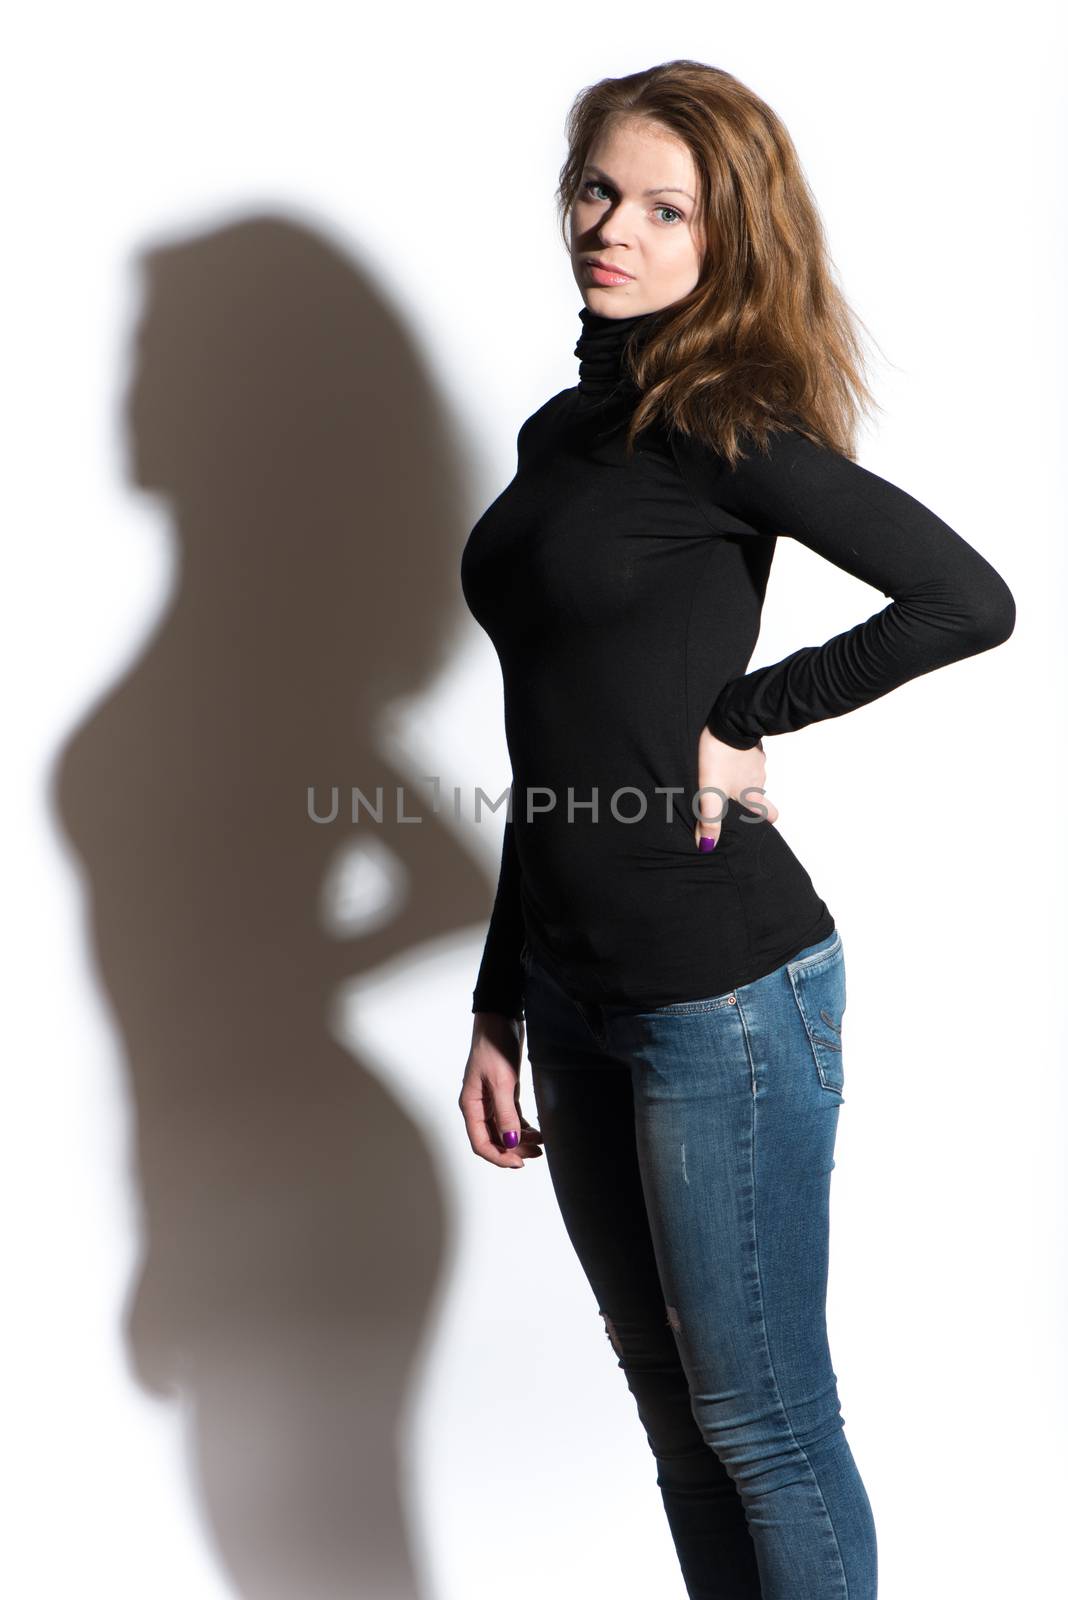 Portrait of young beautiful woman close up on white background with shadow